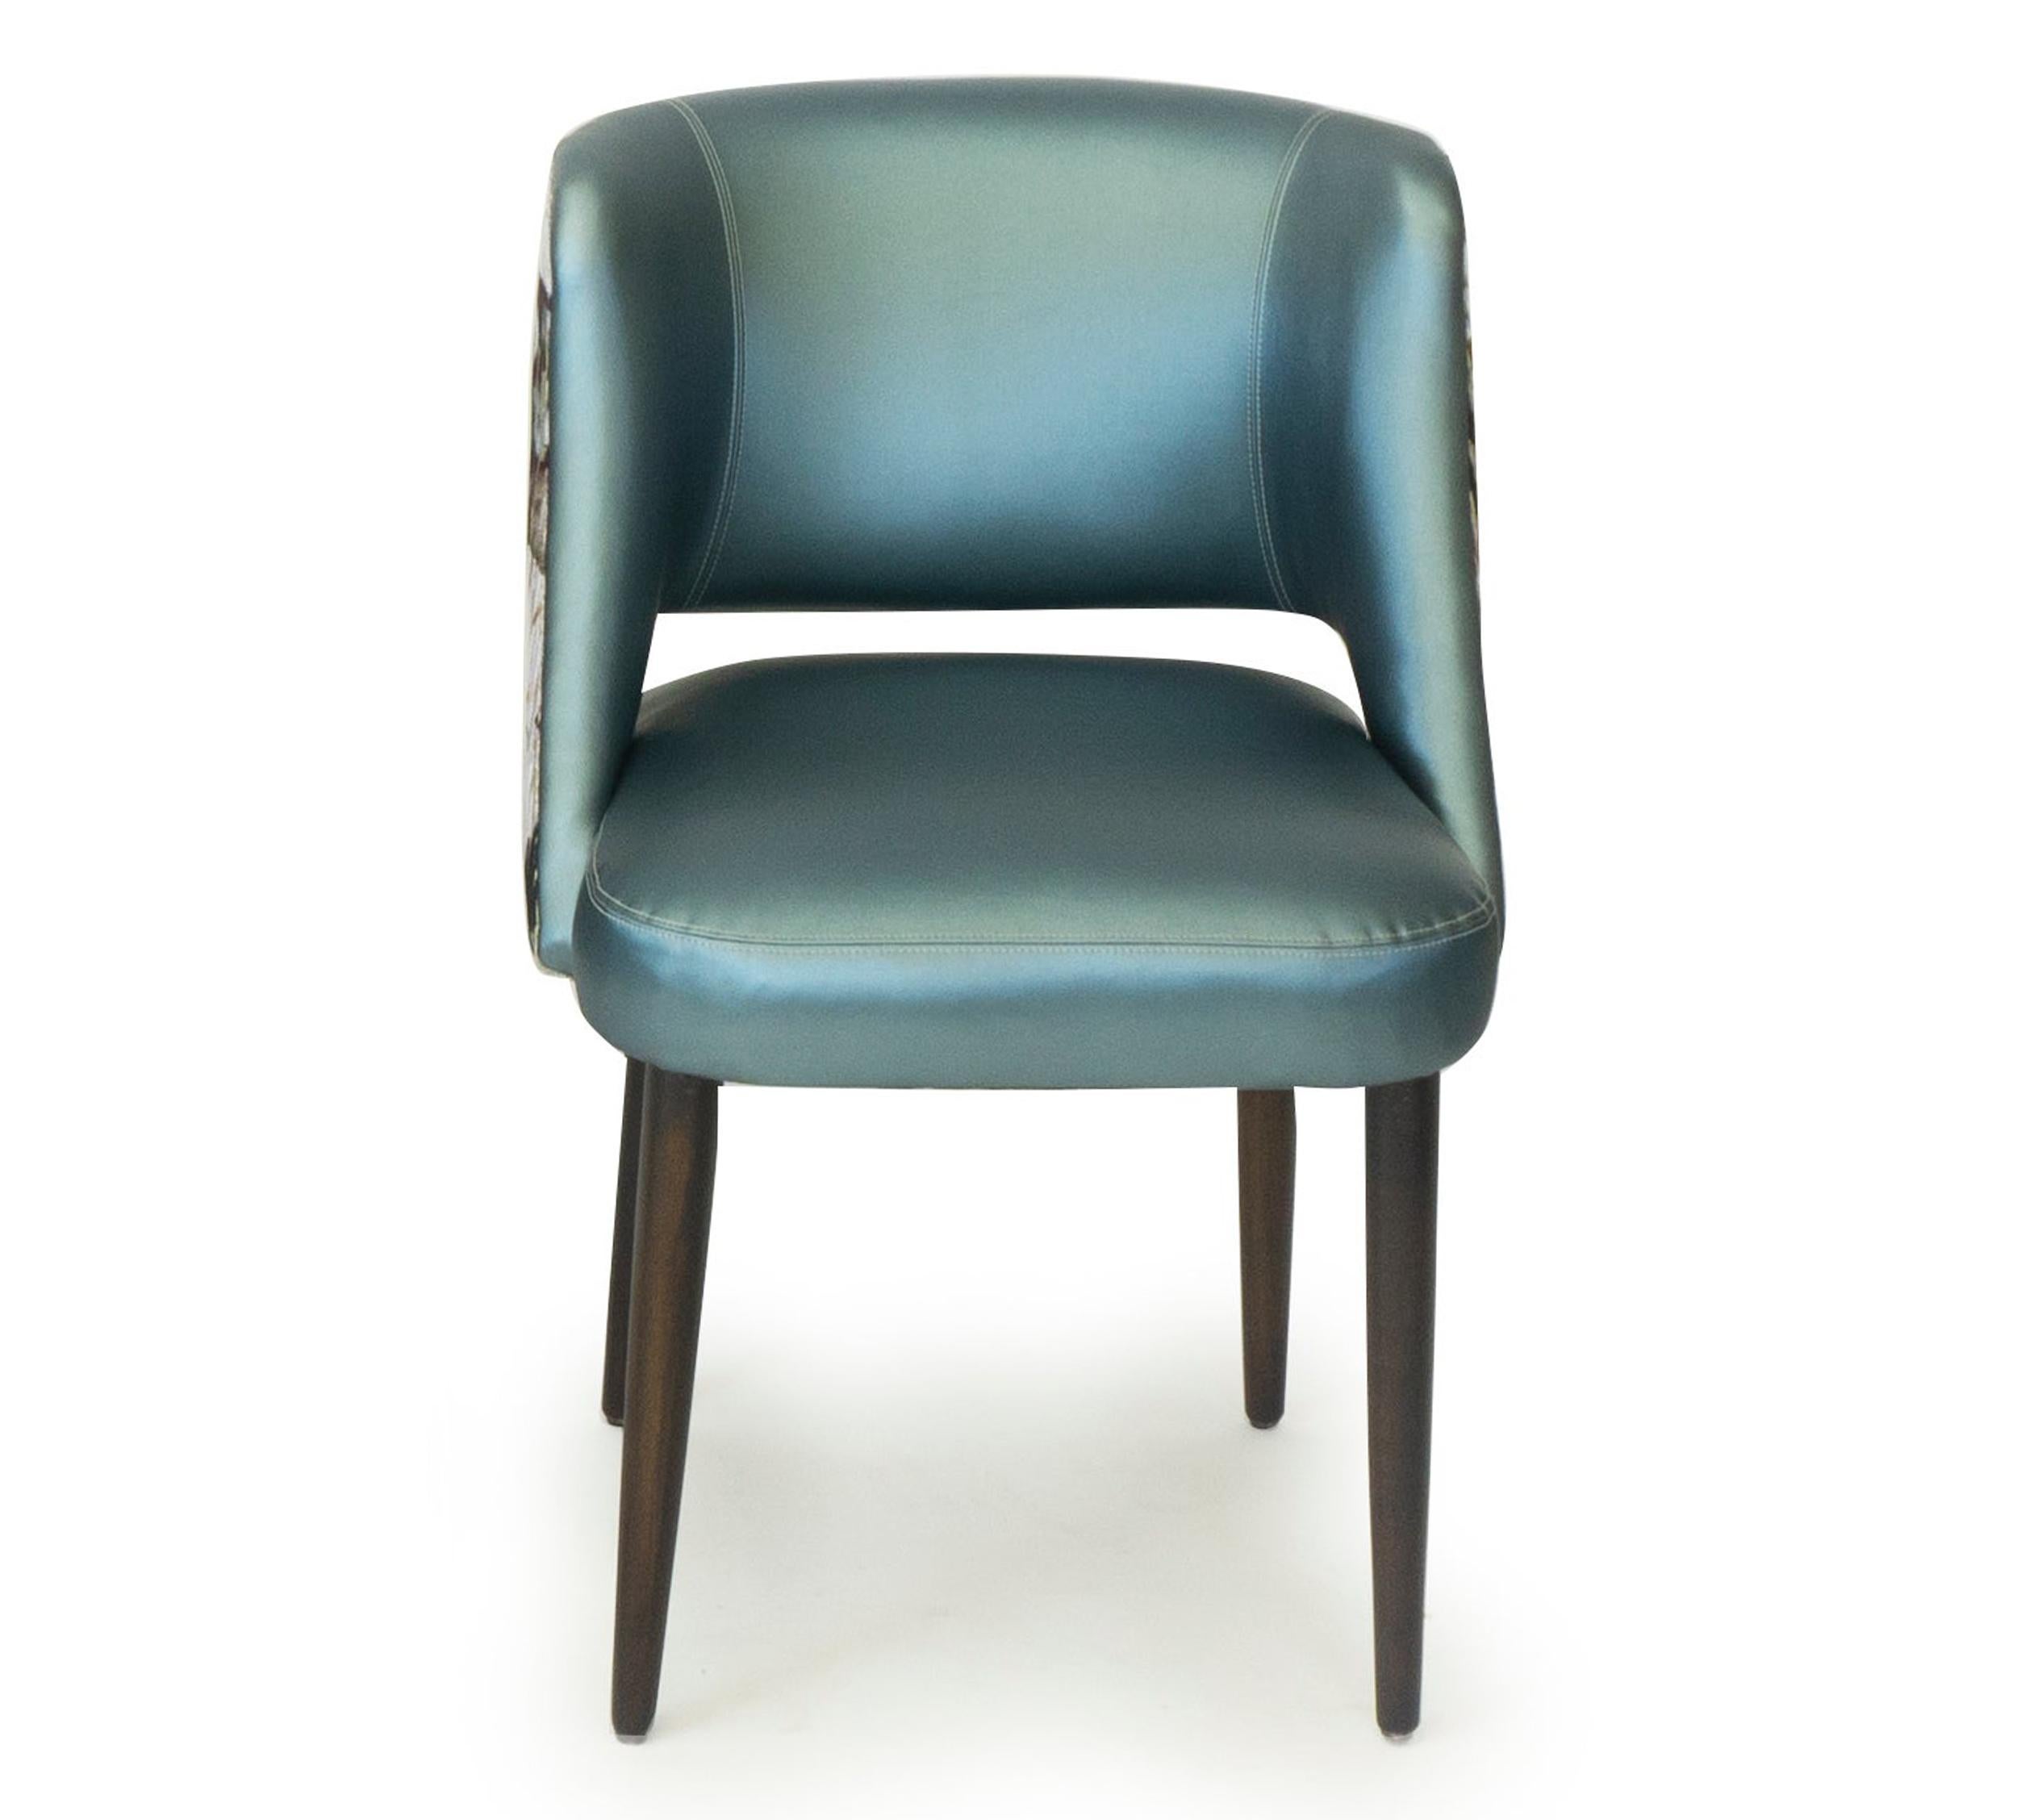 Modern dining chair with a relaxed curve back. Shown in combination of blue vinyl and a floral jacquard velvet by Romo Fabrics. Legs in Walnut finish. This chair is completely customizable and can be remade as shown or with the customers’ choice of